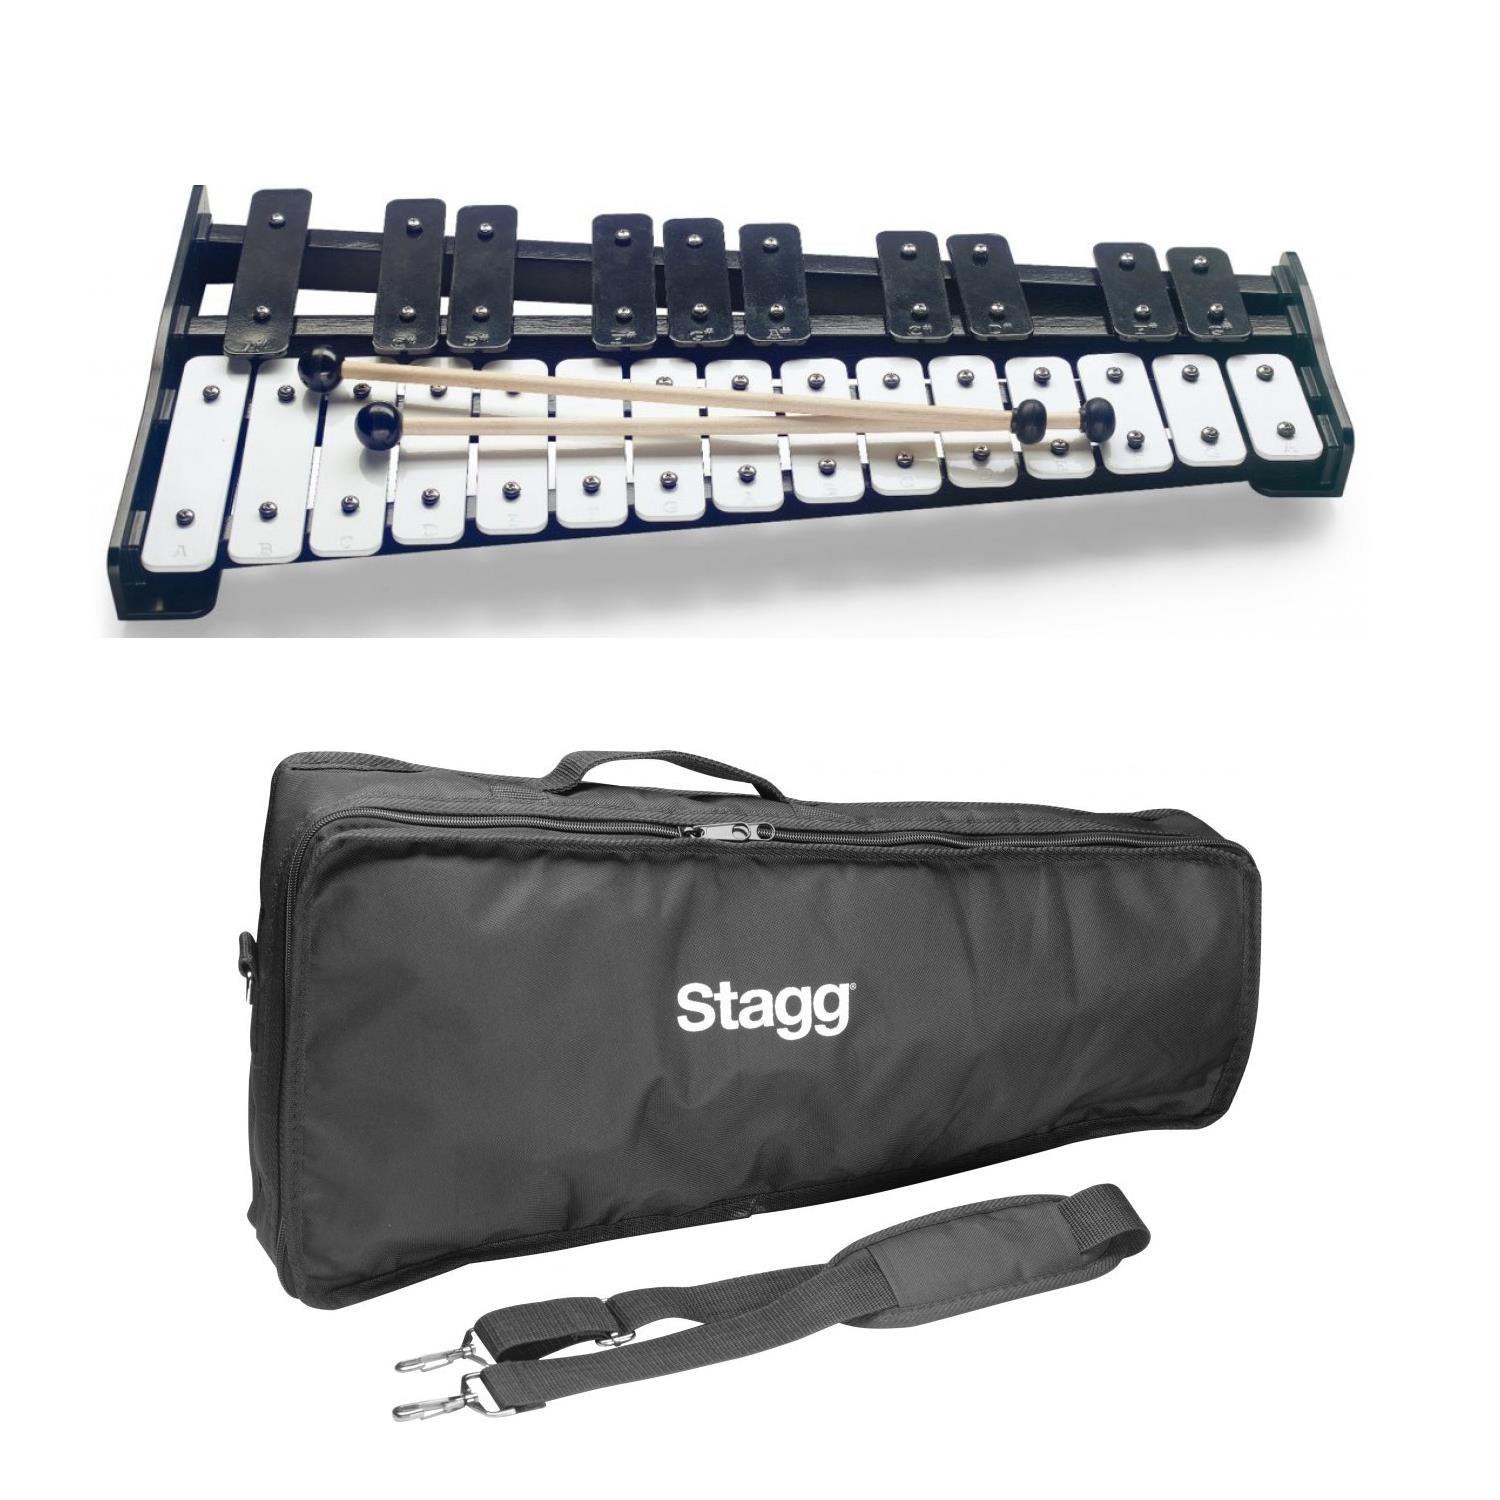 Stagg BELL-SET 25B Metallophone 25 Keys with Carry Bag - DY Pro Audio